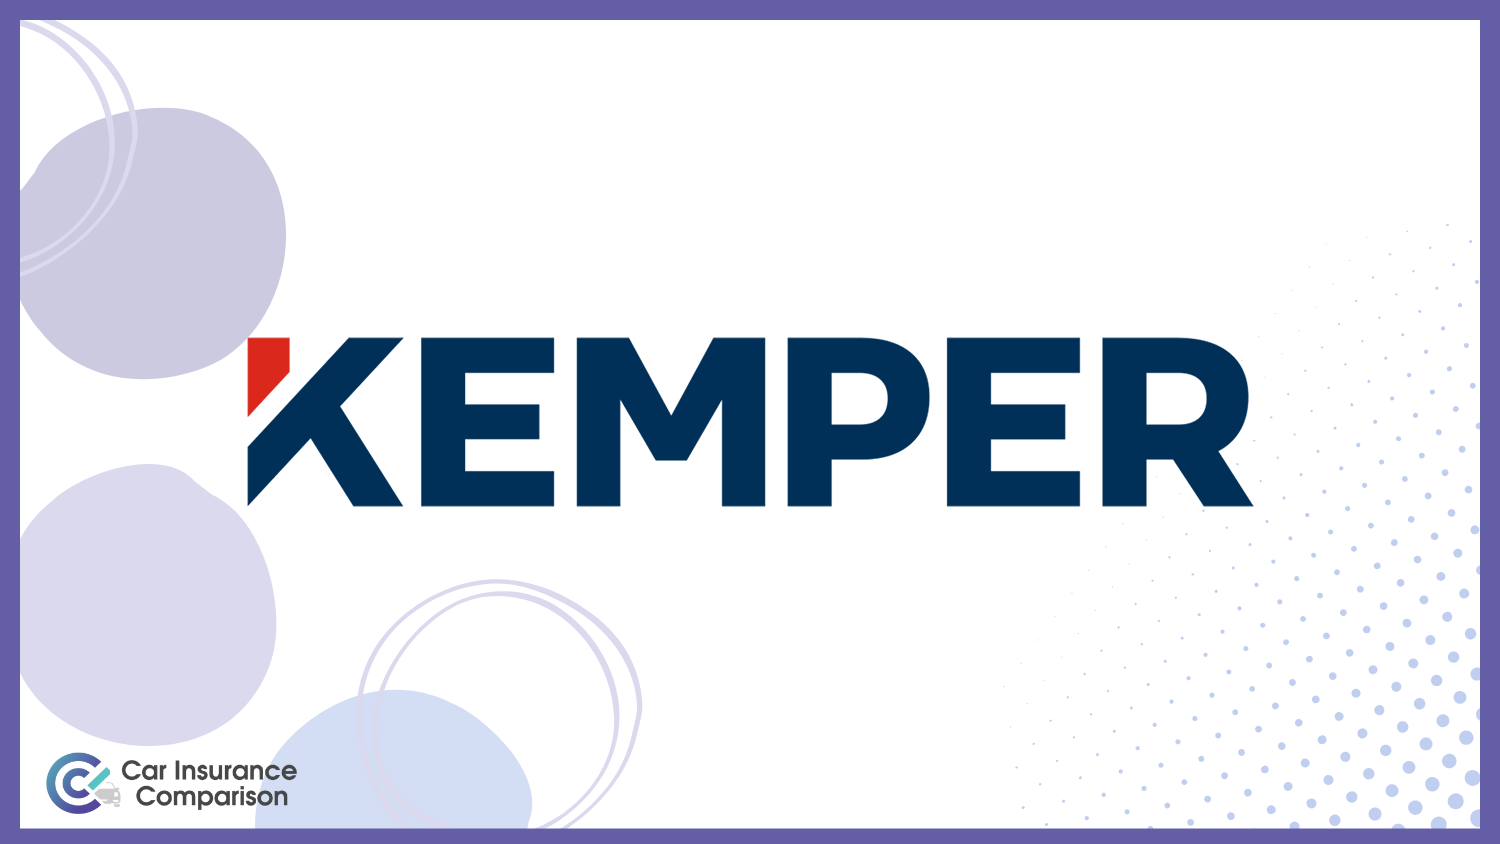 Kemper: Best Car Insurance for Customer Service Occupations